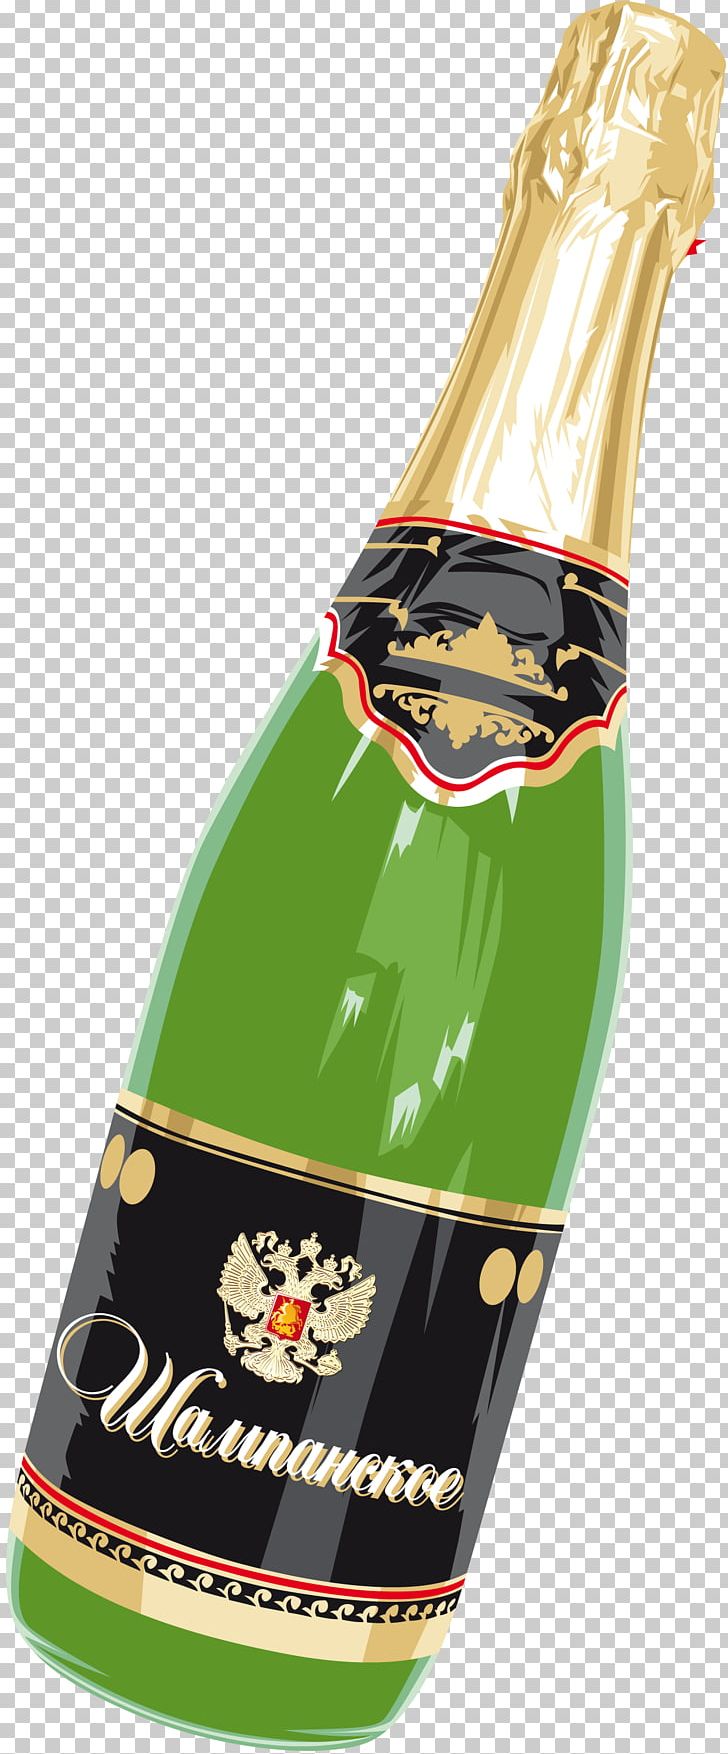 Champagne Wine Bottle Alcoholic Drink Birthday PNG, Clipart, Alcoholic Drink, Beer Bottle, Birthday, Bottle, Champagne Free PNG Download